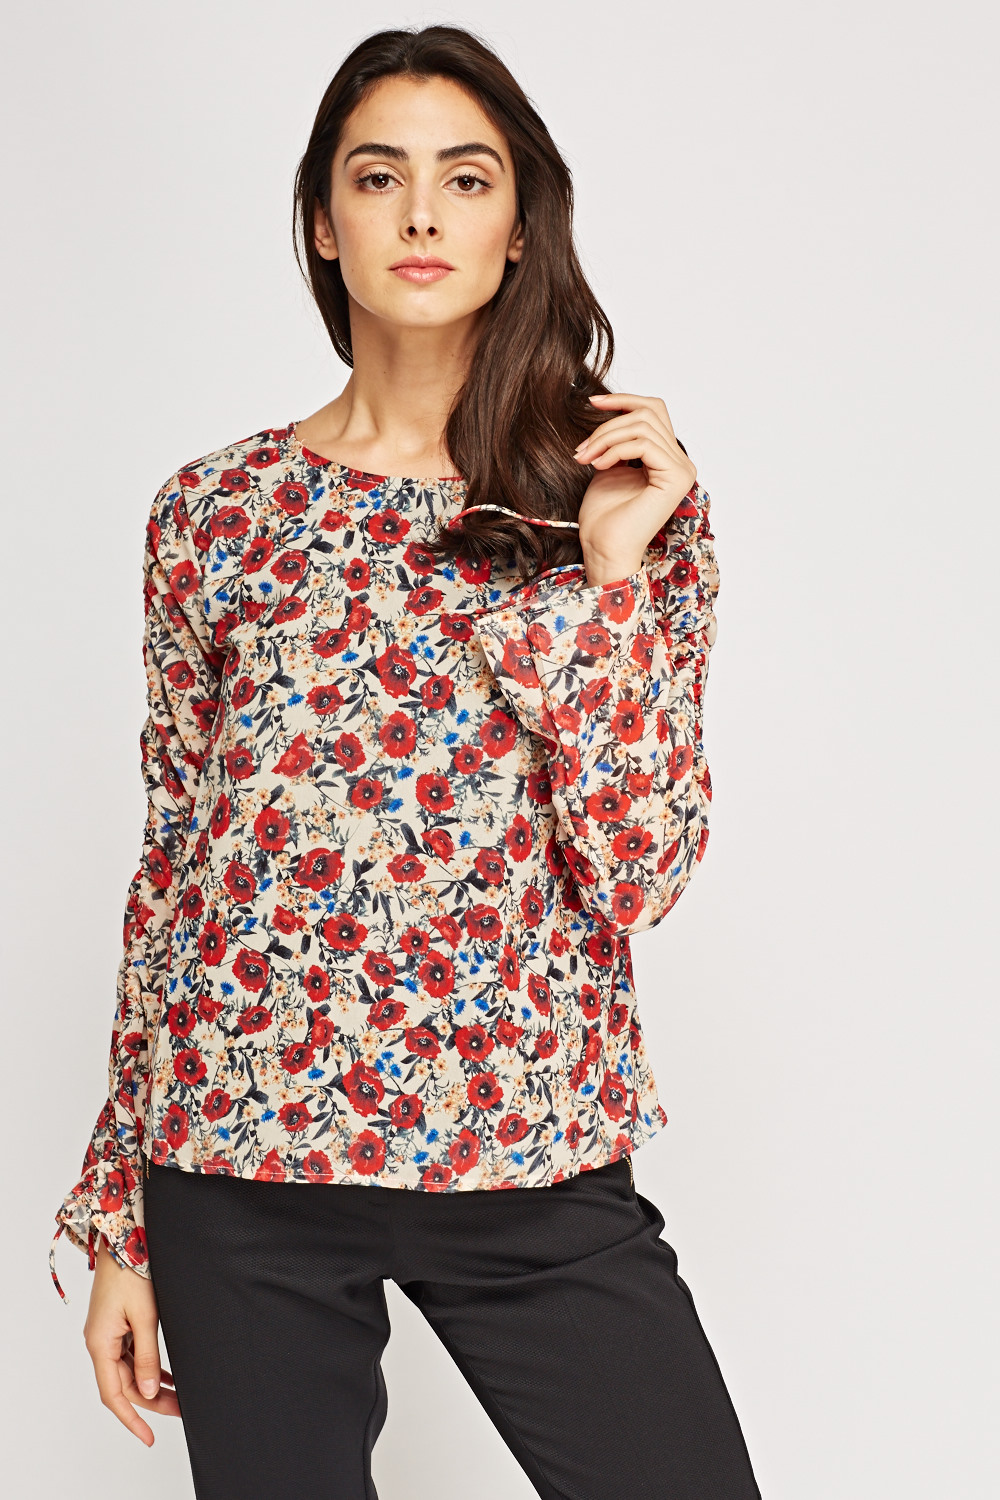 Floral Sheer Blouse - Just $7